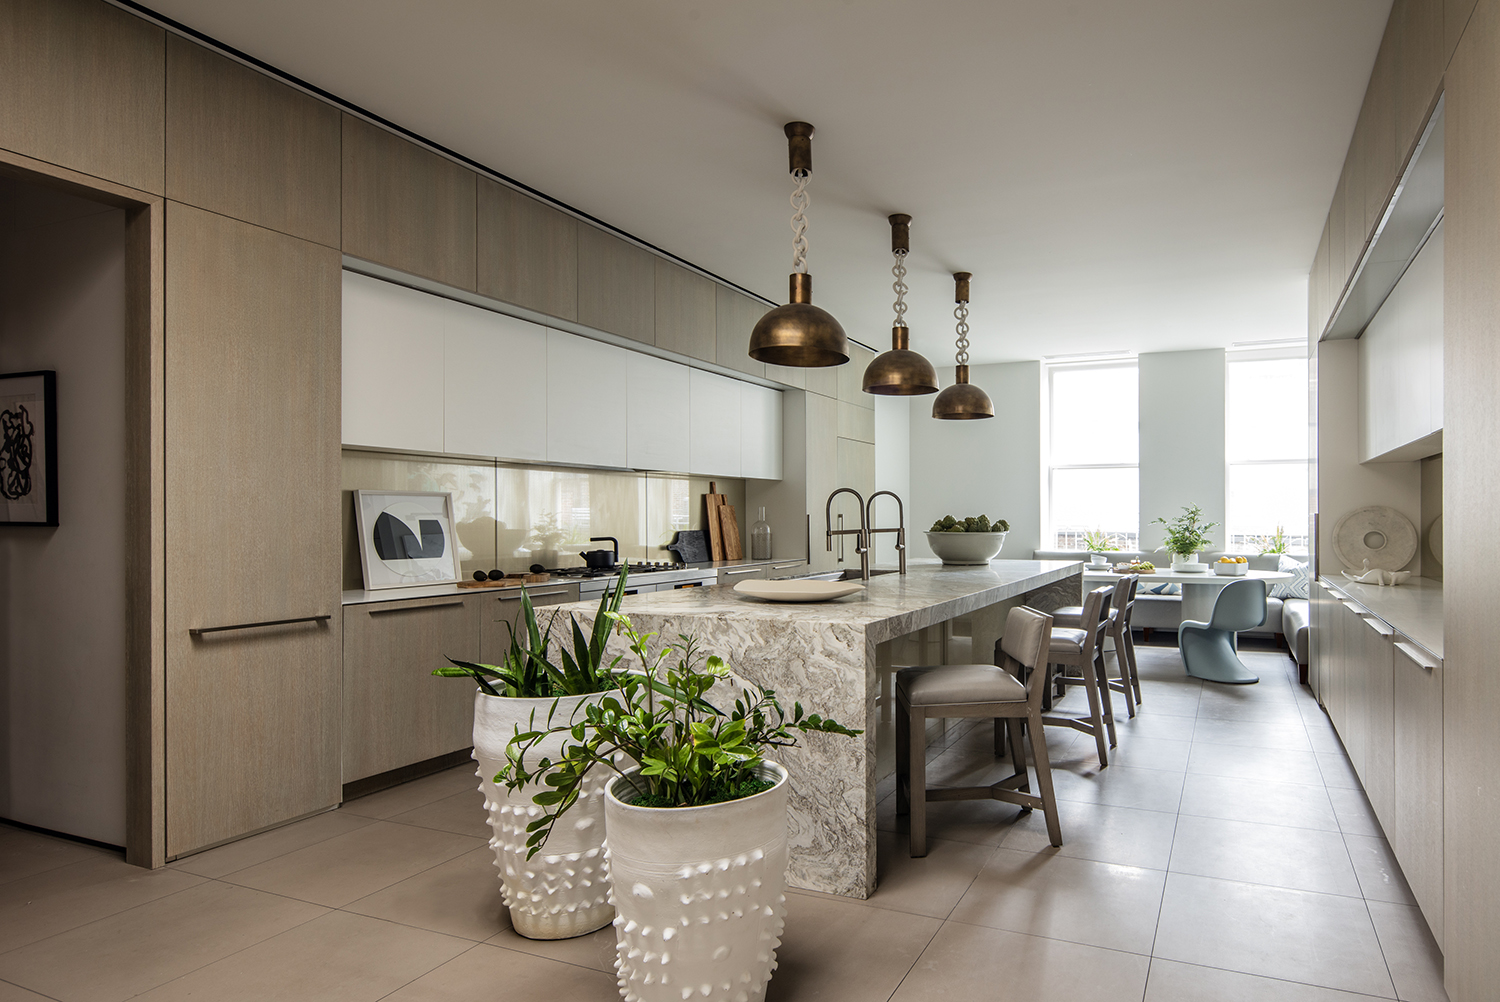 A kitchen with a spacious island and a potted plant, creating a vibrant and functional space.